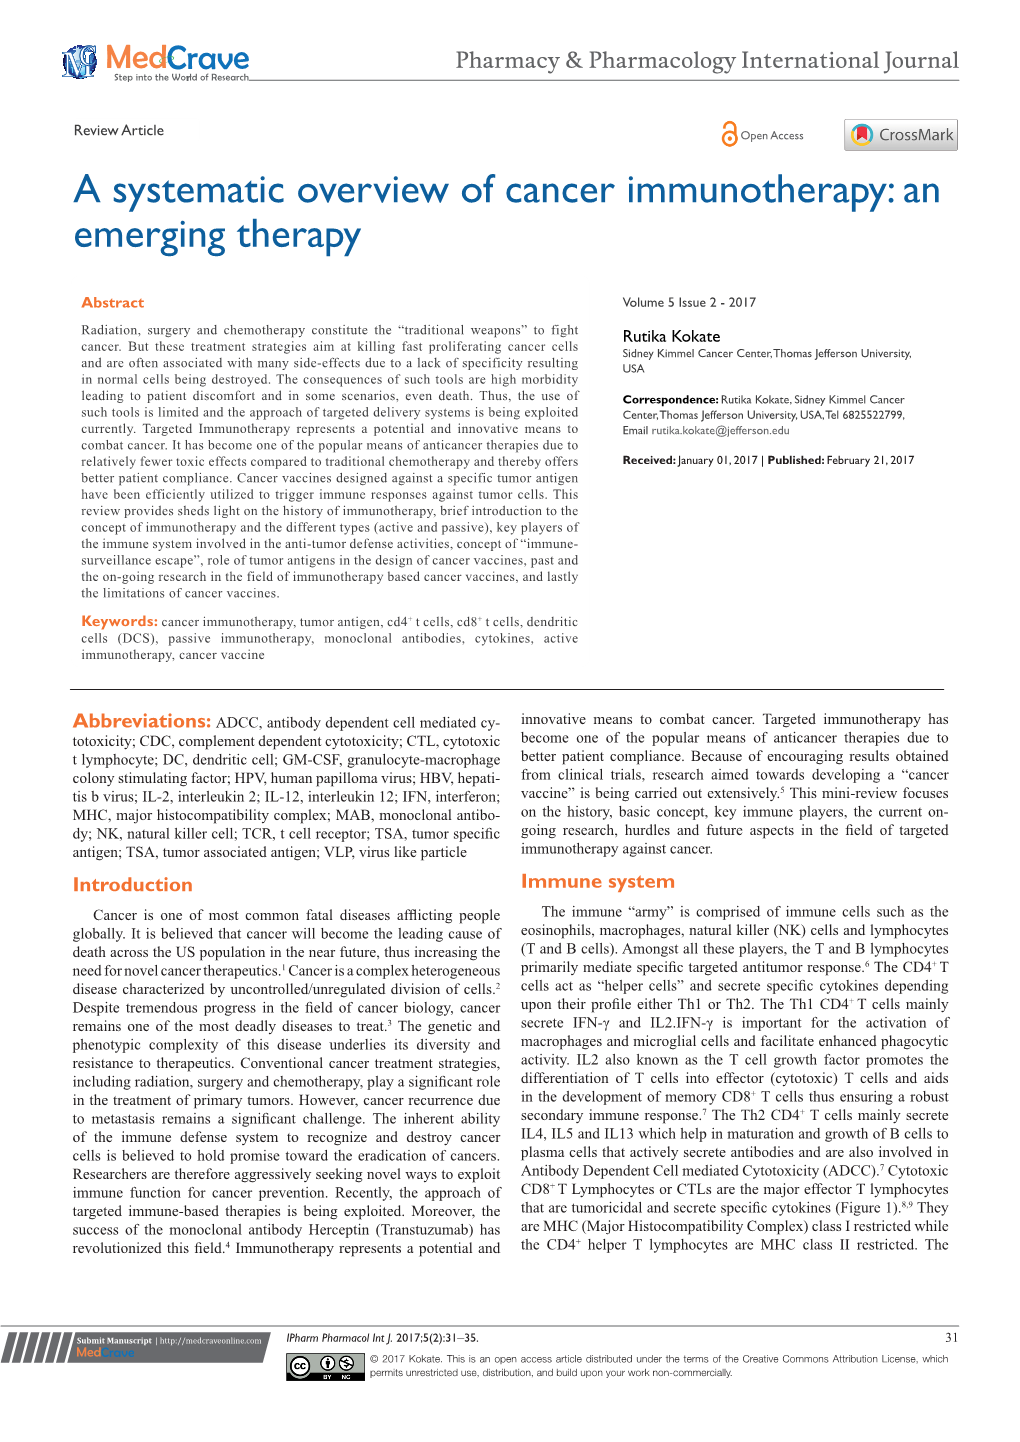 A Systematic Overview of Cancer Immunotherapy: an Emerging Therapy